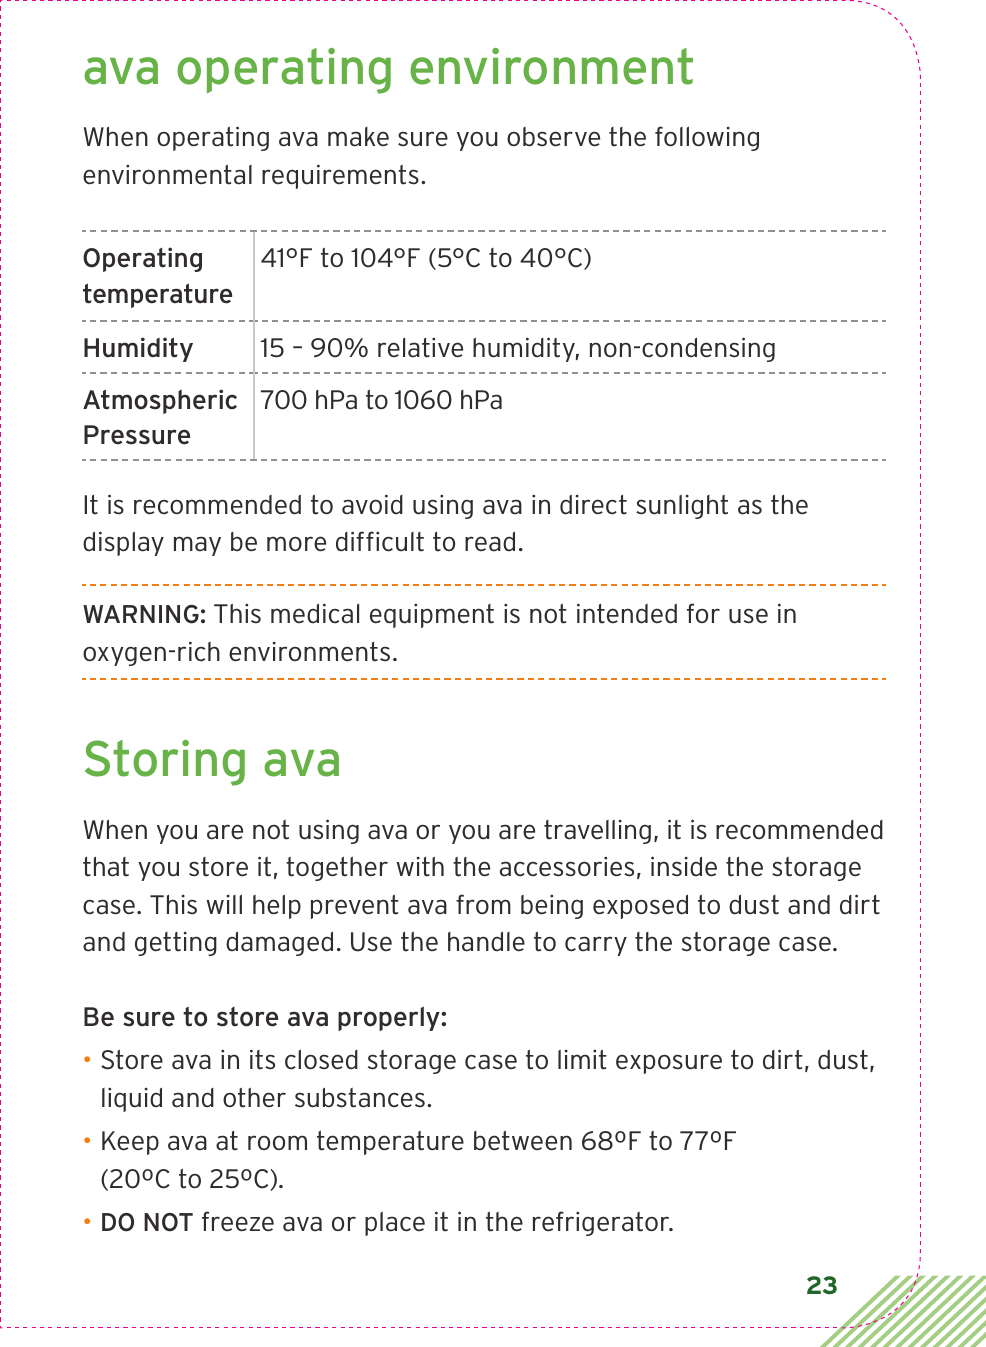 23ava operating environmentWhen operating ava make sure you observe the following environmental requirements.Operating temperature41°F to 104°F (5°C to 40°C) Humidity 15 – 90% relative humidity, non-condensingAtmospheric Pressure700 hPa to 1060 hPaIt is recommended to avoid using ava in direct sunlight as the display may be more difﬁcult to read.WARNING: This medical equipment is not intended for use in oxygen-rich environments. Storing avaWhen you are not using ava or you are travelling, it is recommended that you store it, together with the accessories, inside the storage case. This will help prevent ava from being exposed to dust and dirt and getting damaged. Use the handle to carry the storage case.Be sure to store ava properly:• Store ava in its closed storage case to limit exposure to dirt, dust, liquid and other substances.• Keep ava at room temperature between 68ºF to 77ºF  (20ºC to 25ºC).• DO NOT freeze ava or place it in the refrigerator.